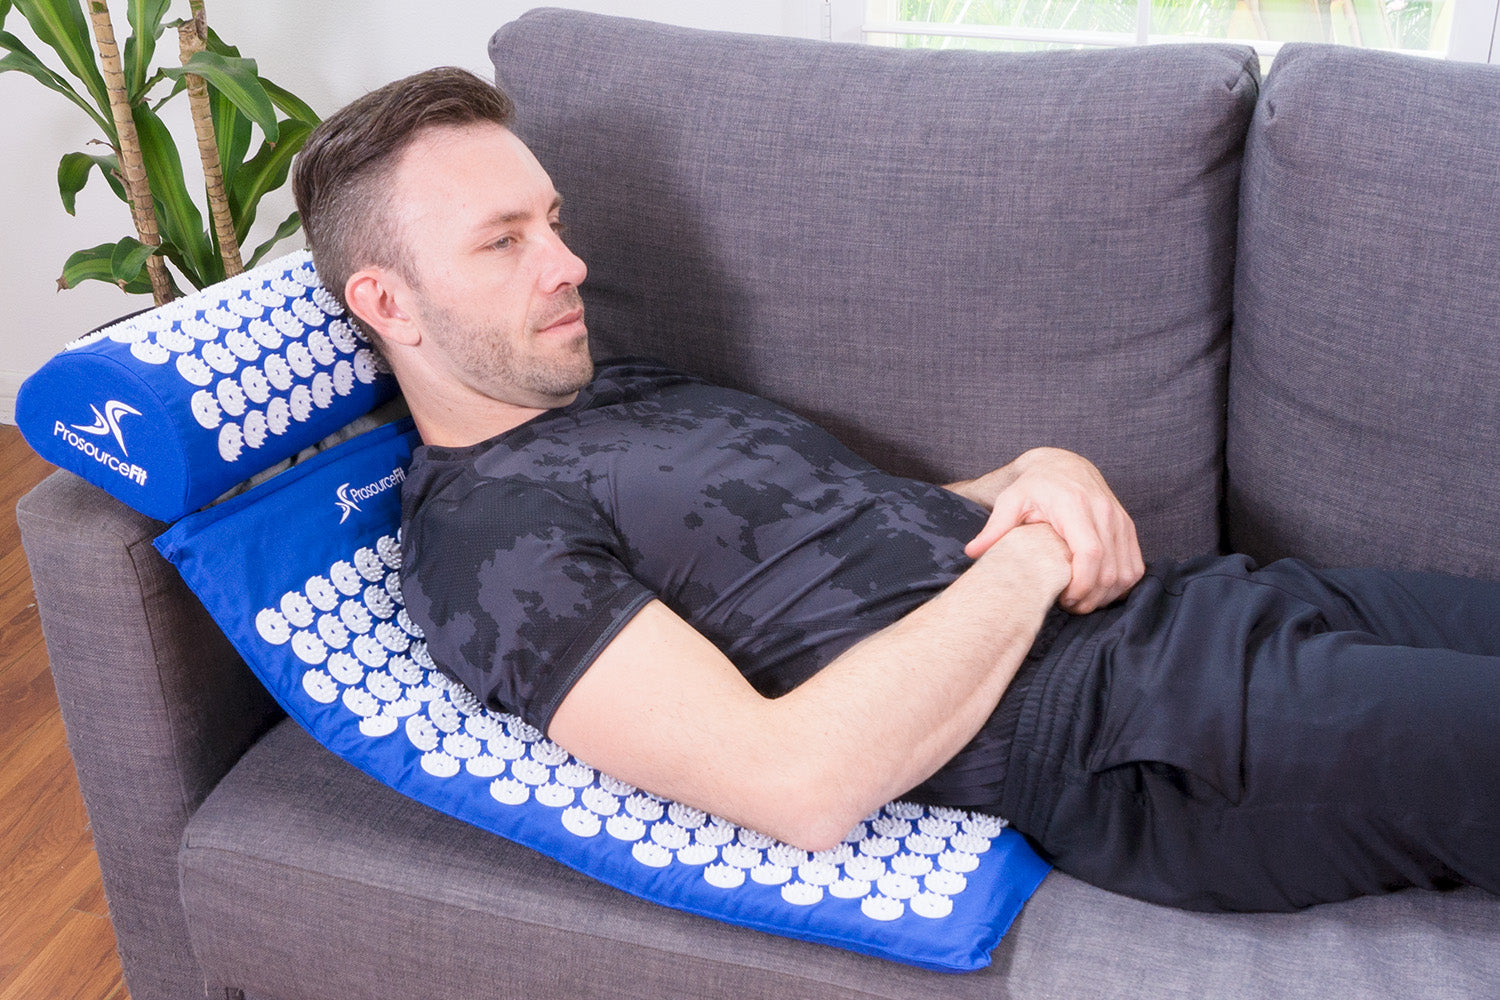 Acupuncture Mat And Pillow For Relieving Your Back And Muscle Pain